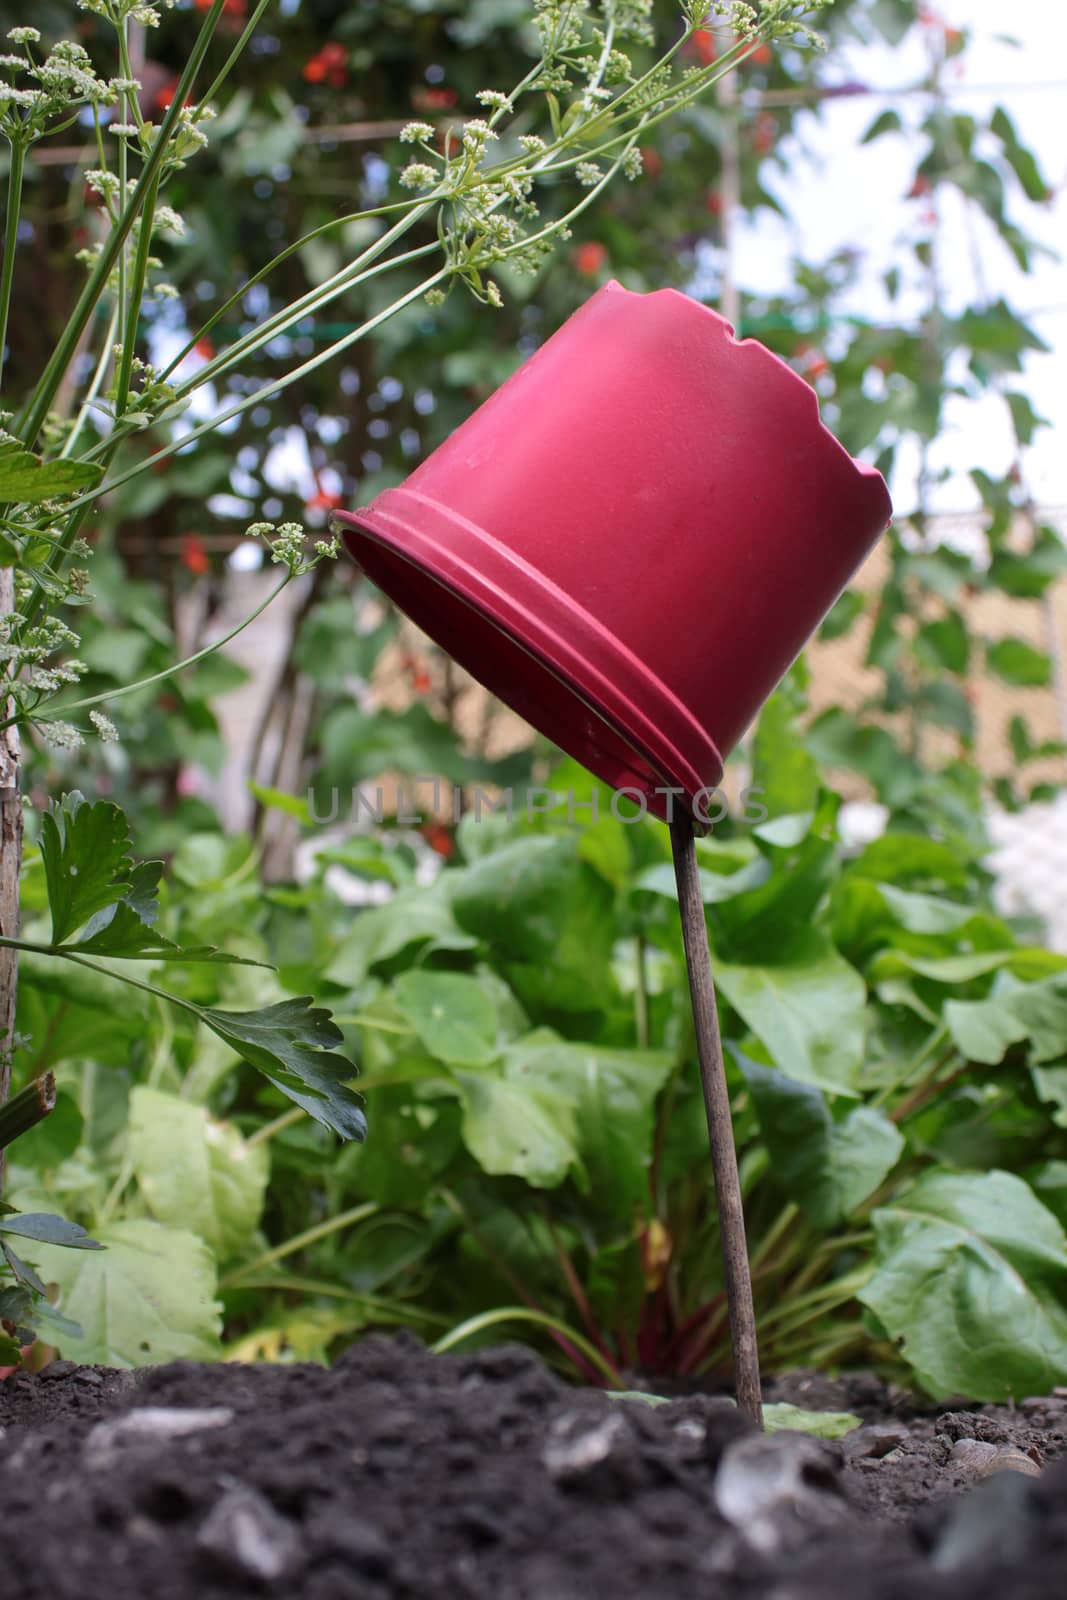 A single red plastic plant pot on a wooden stick in a suburban vegetable garden setting. Used as a marker in front of the green shooting leaves of some Beetroot and a seeding celery plant. Viewd from a low angle on a portrait format.